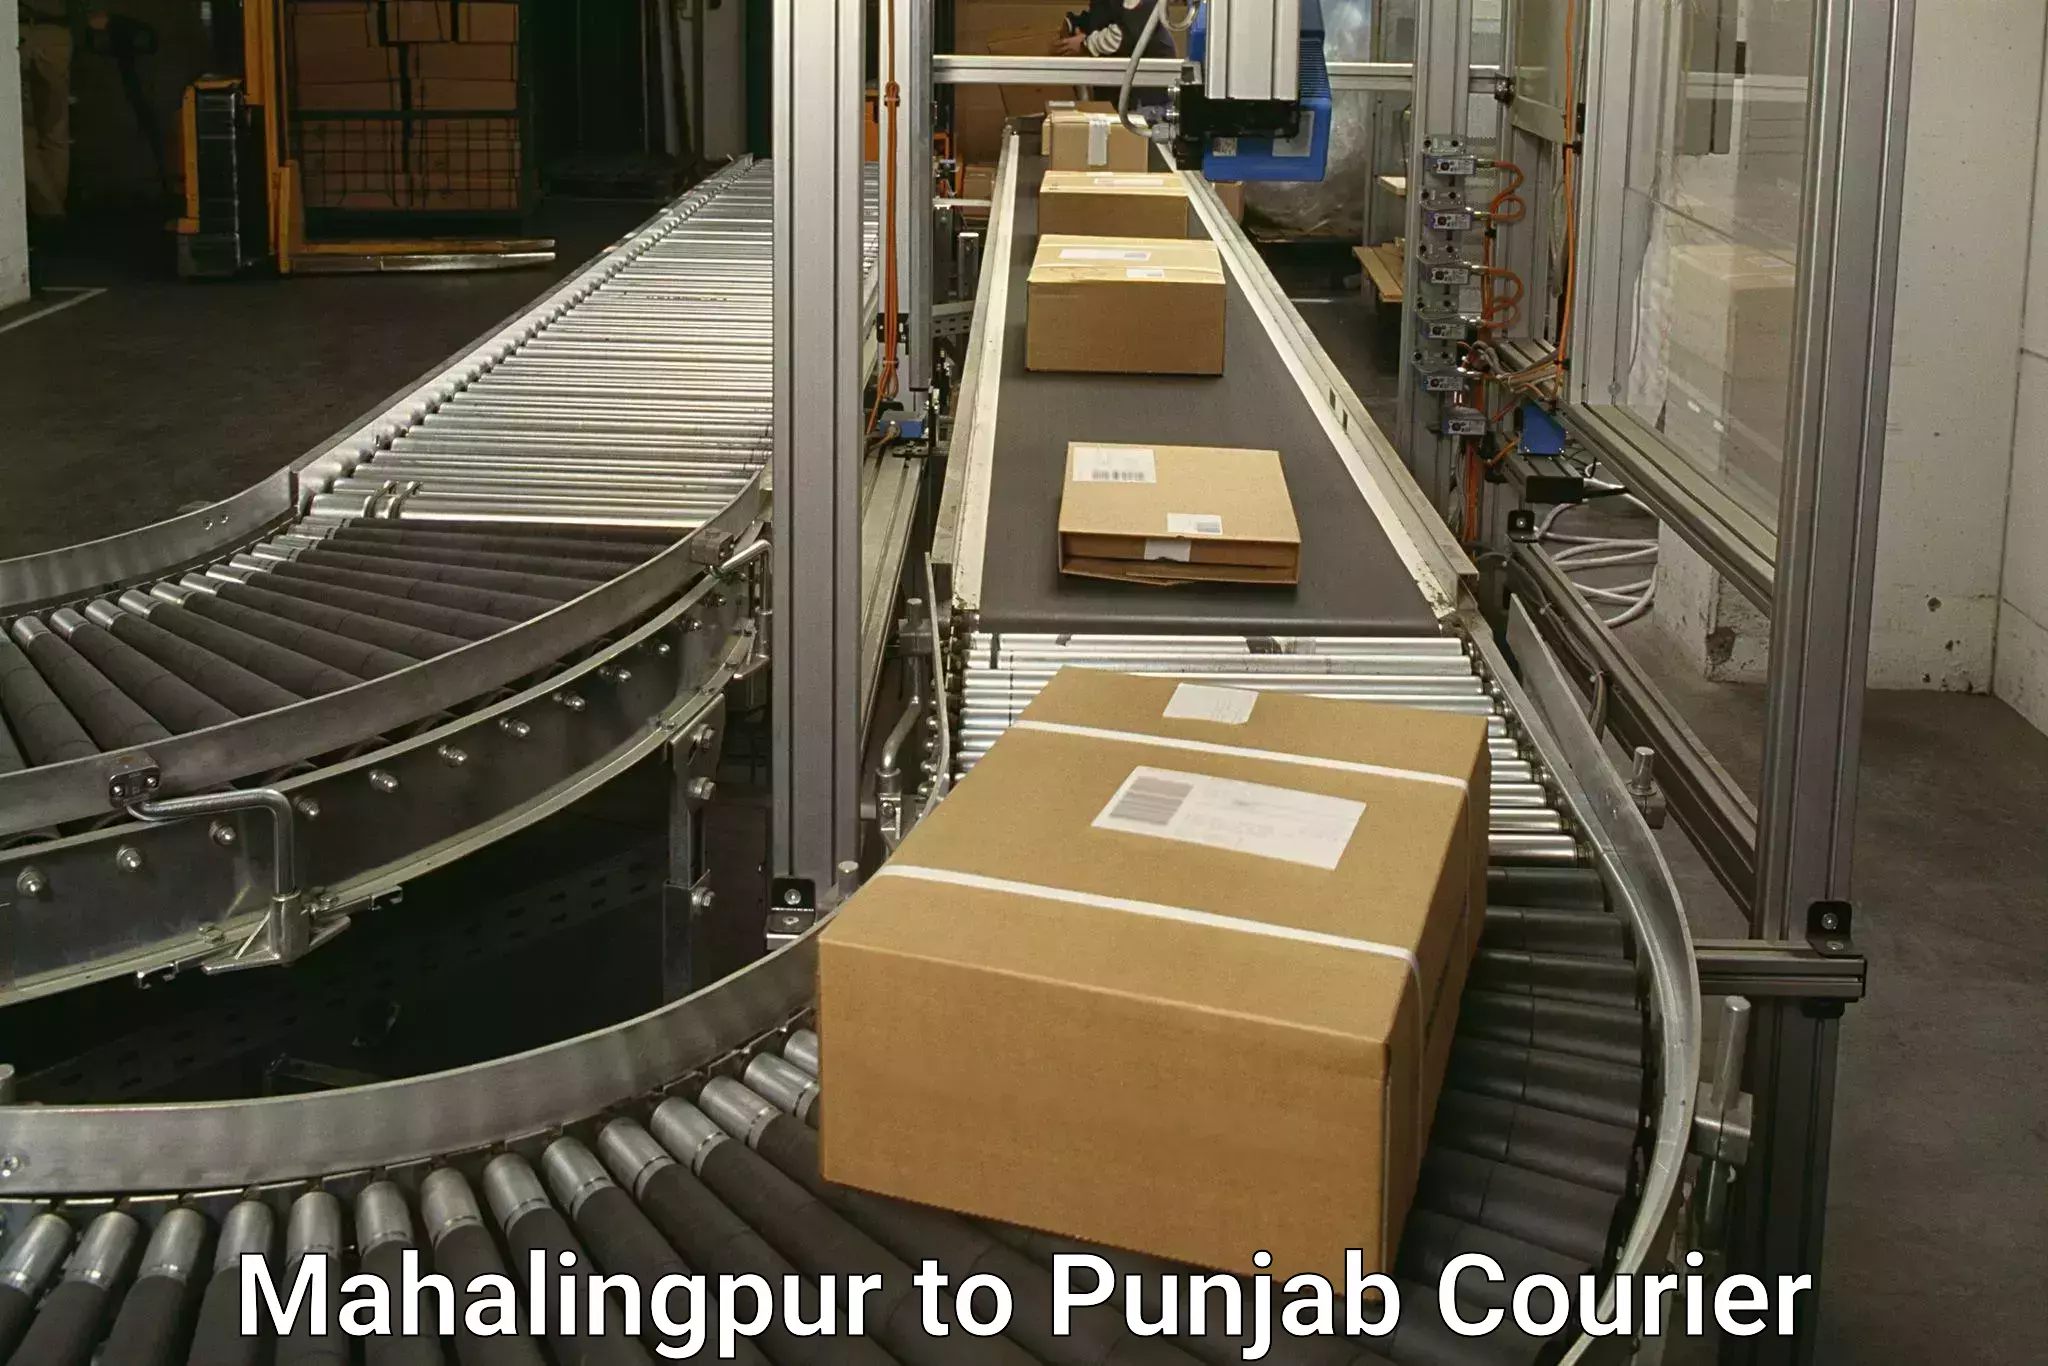 Tech-enabled shipping Mahalingpur to Sirhind Fatehgarh